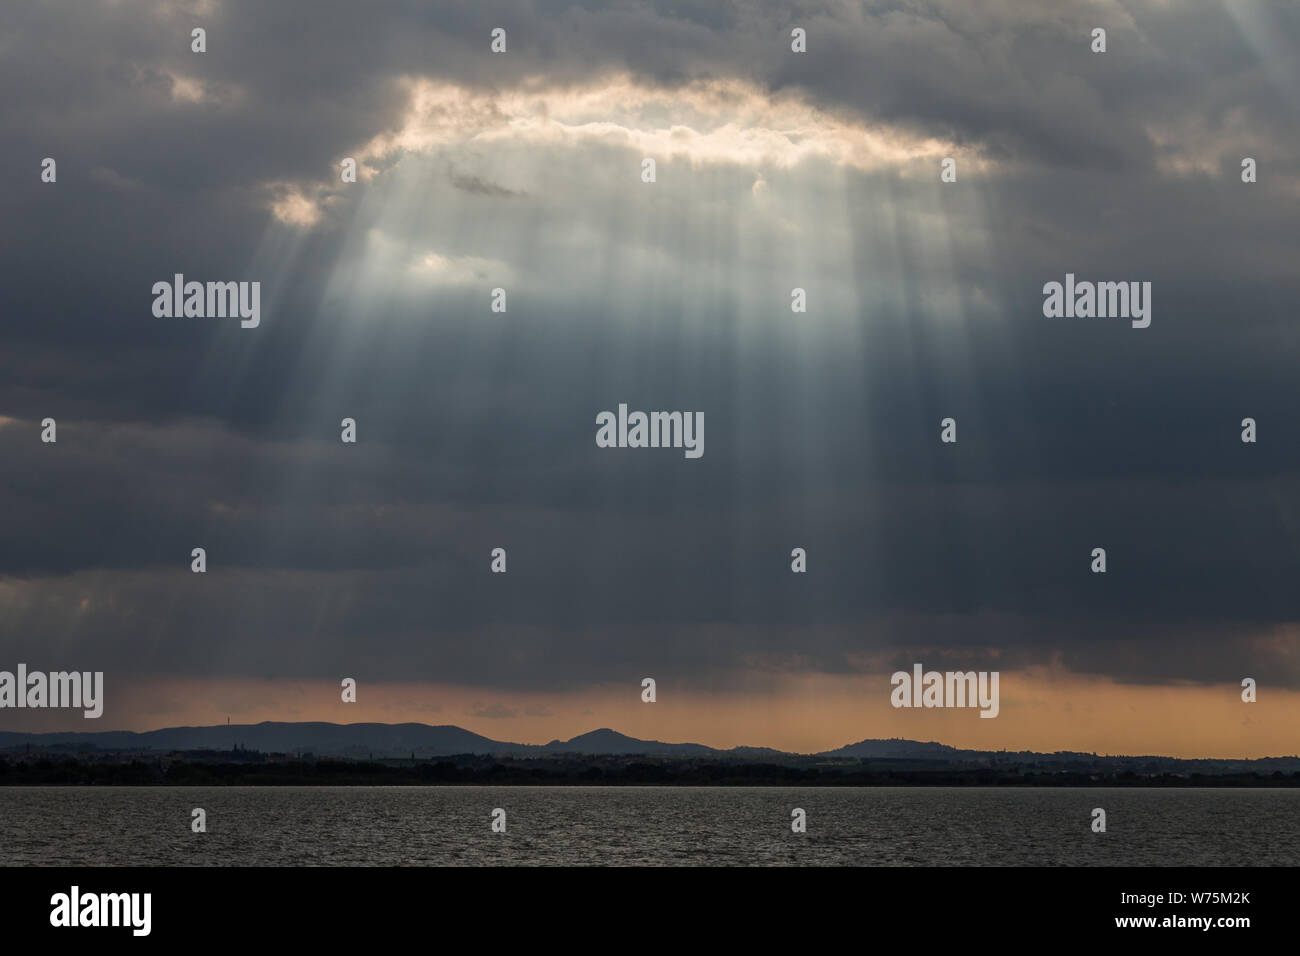 Sunrays at near sunset, with dark clouds in the background, an orange sky, and Trasimeno lake (Umbria, Italy) below Stock Photo